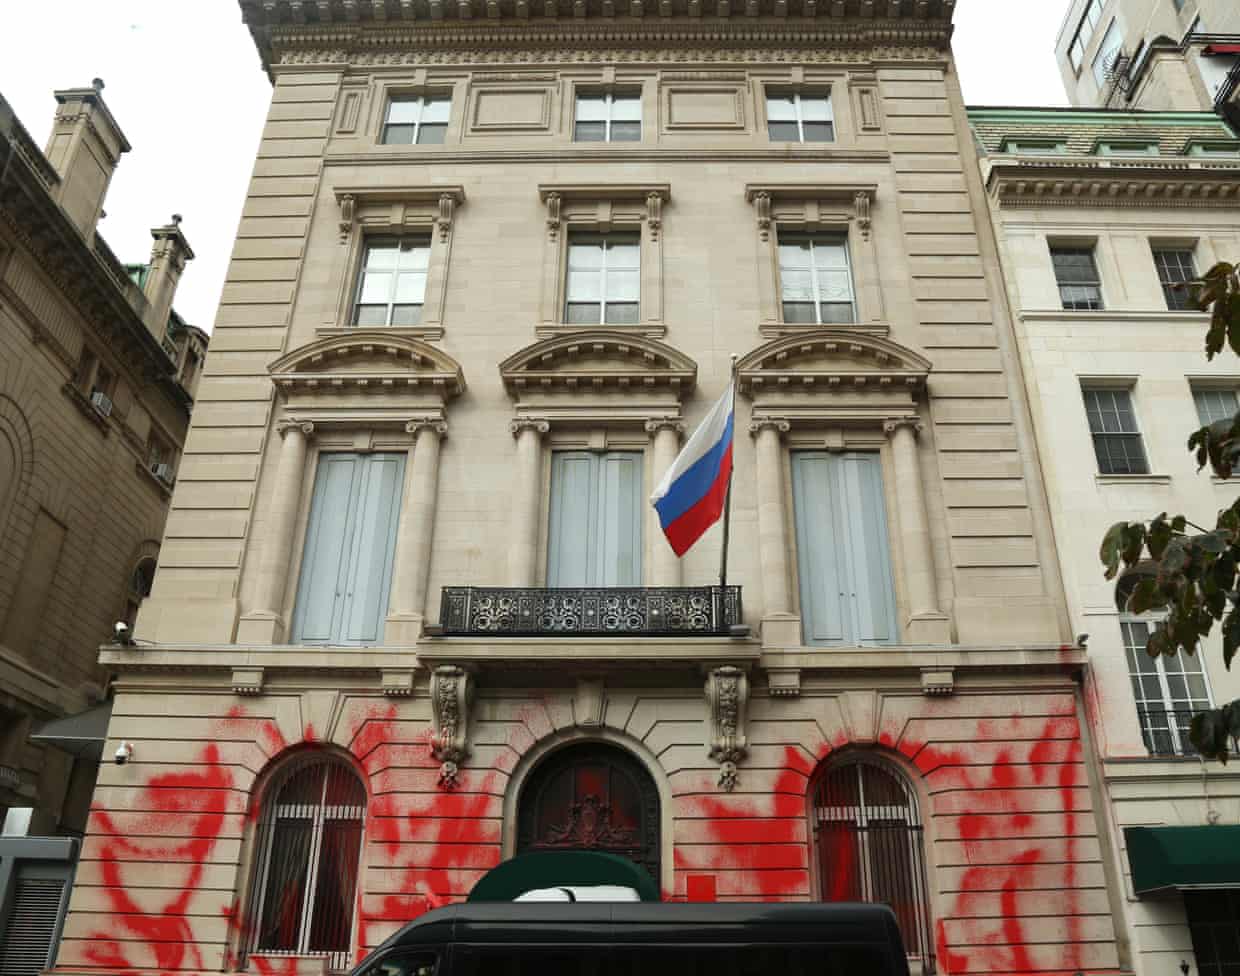 Russia’s consulate in New York vandalized in apparent protest (theguardian.com)